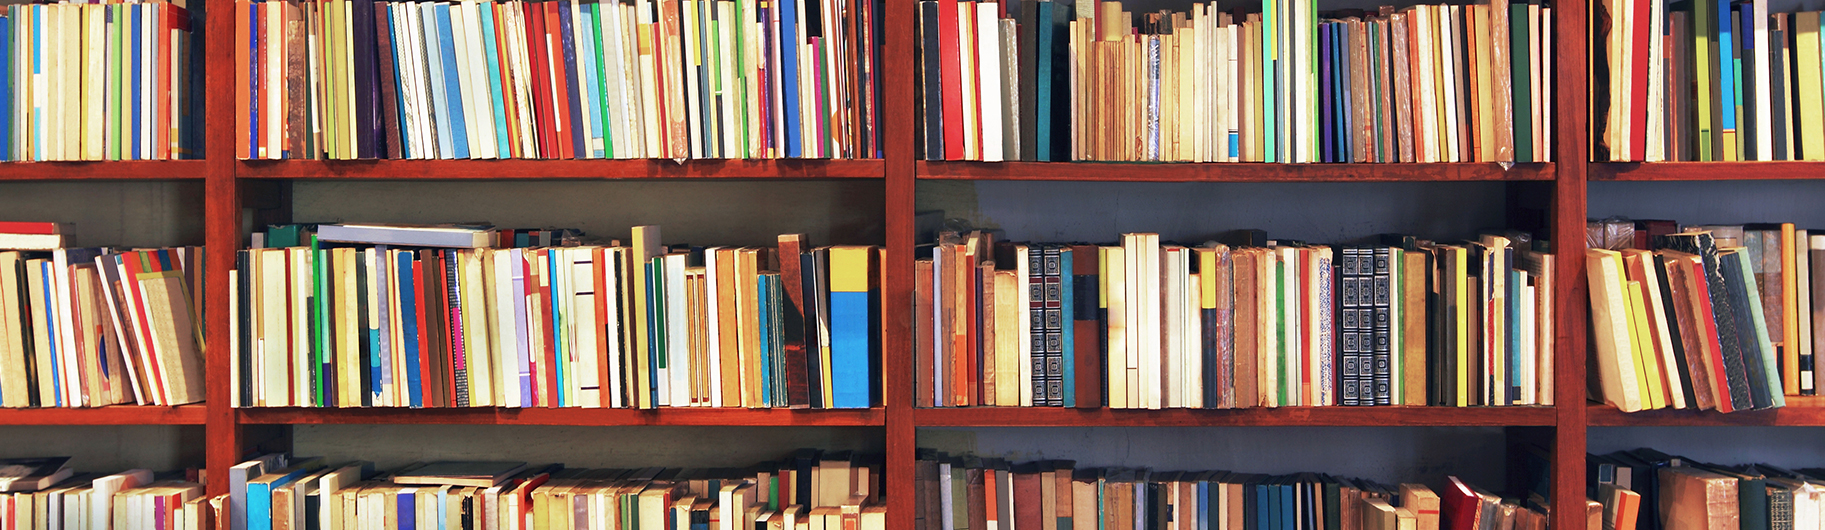 bookcases with books